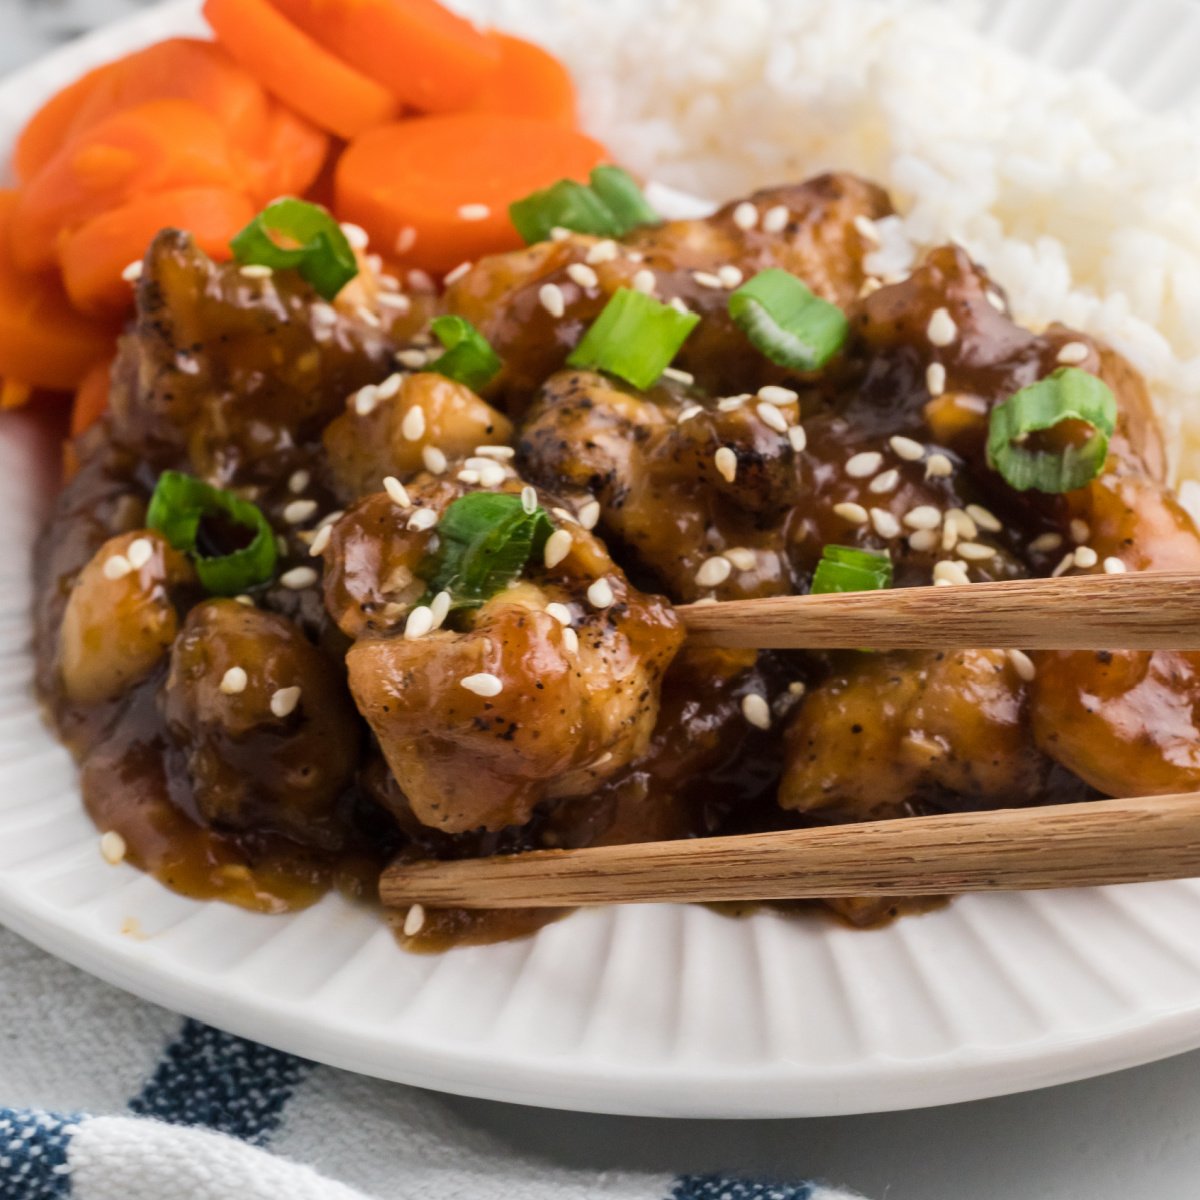 Air fryer teriyaki chicken on a plate with a side of rice and sliced carrots.